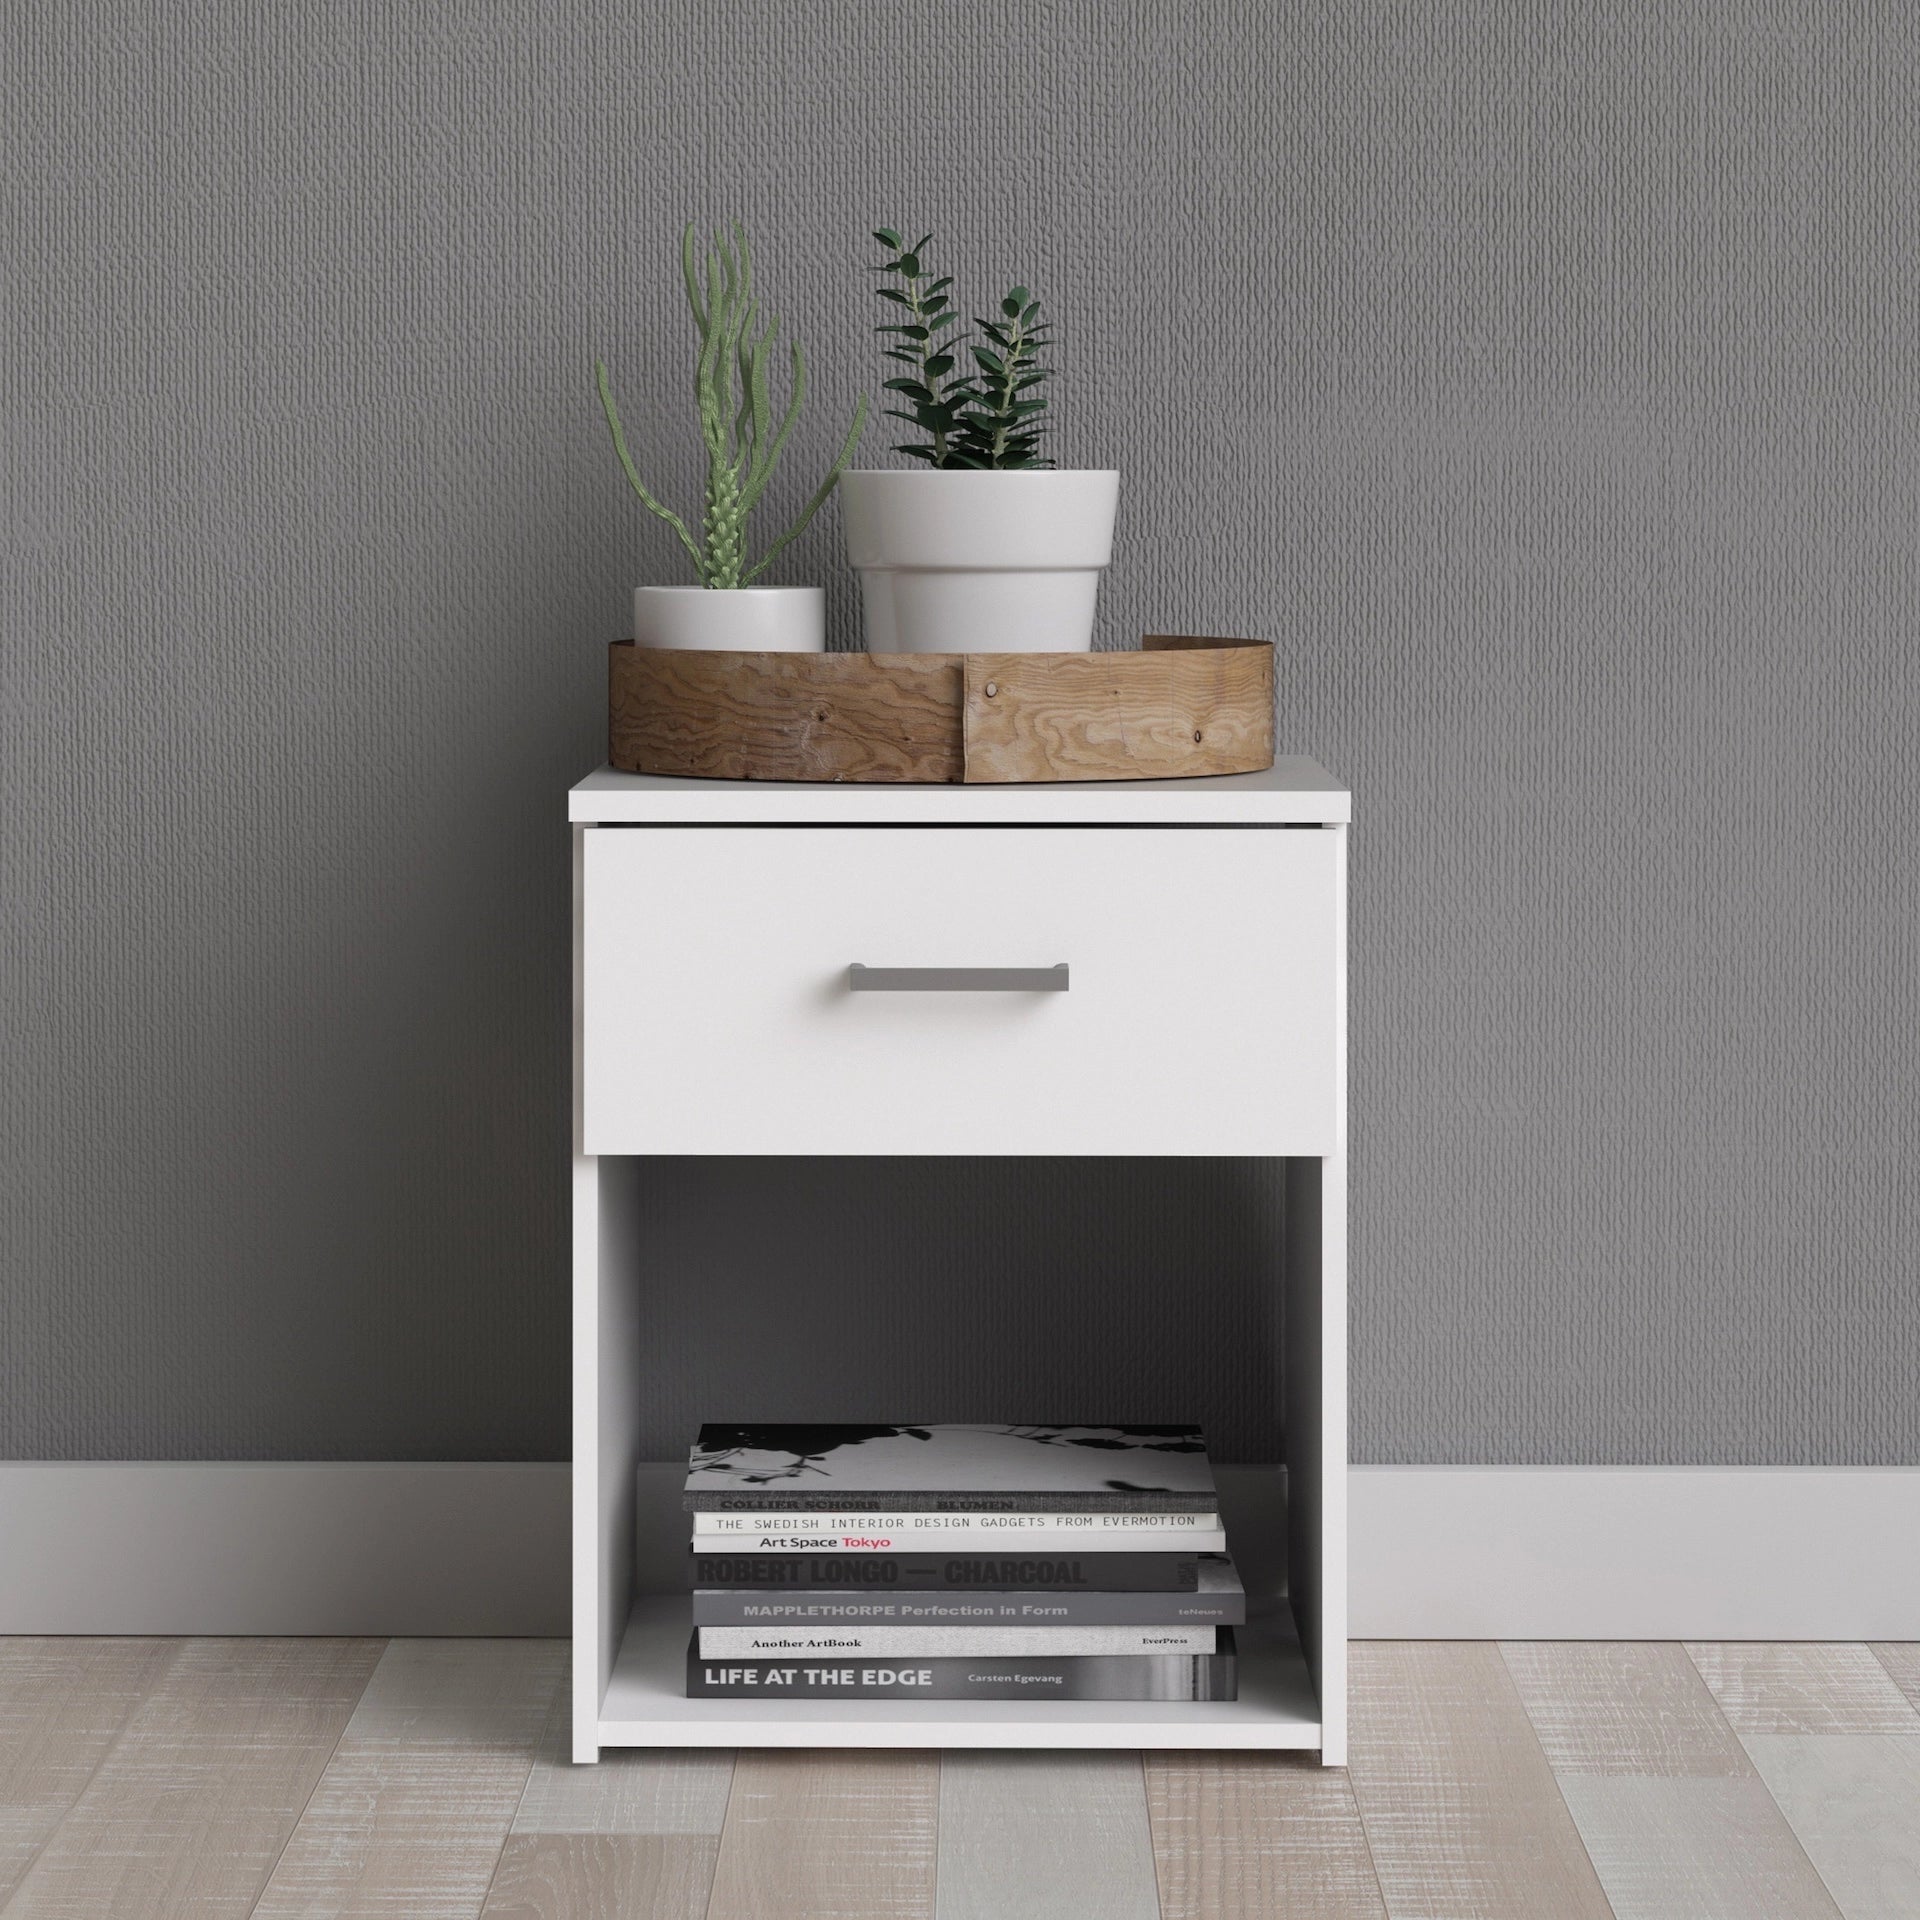 Furniture To Go Space Bedside 1 Drawer in White